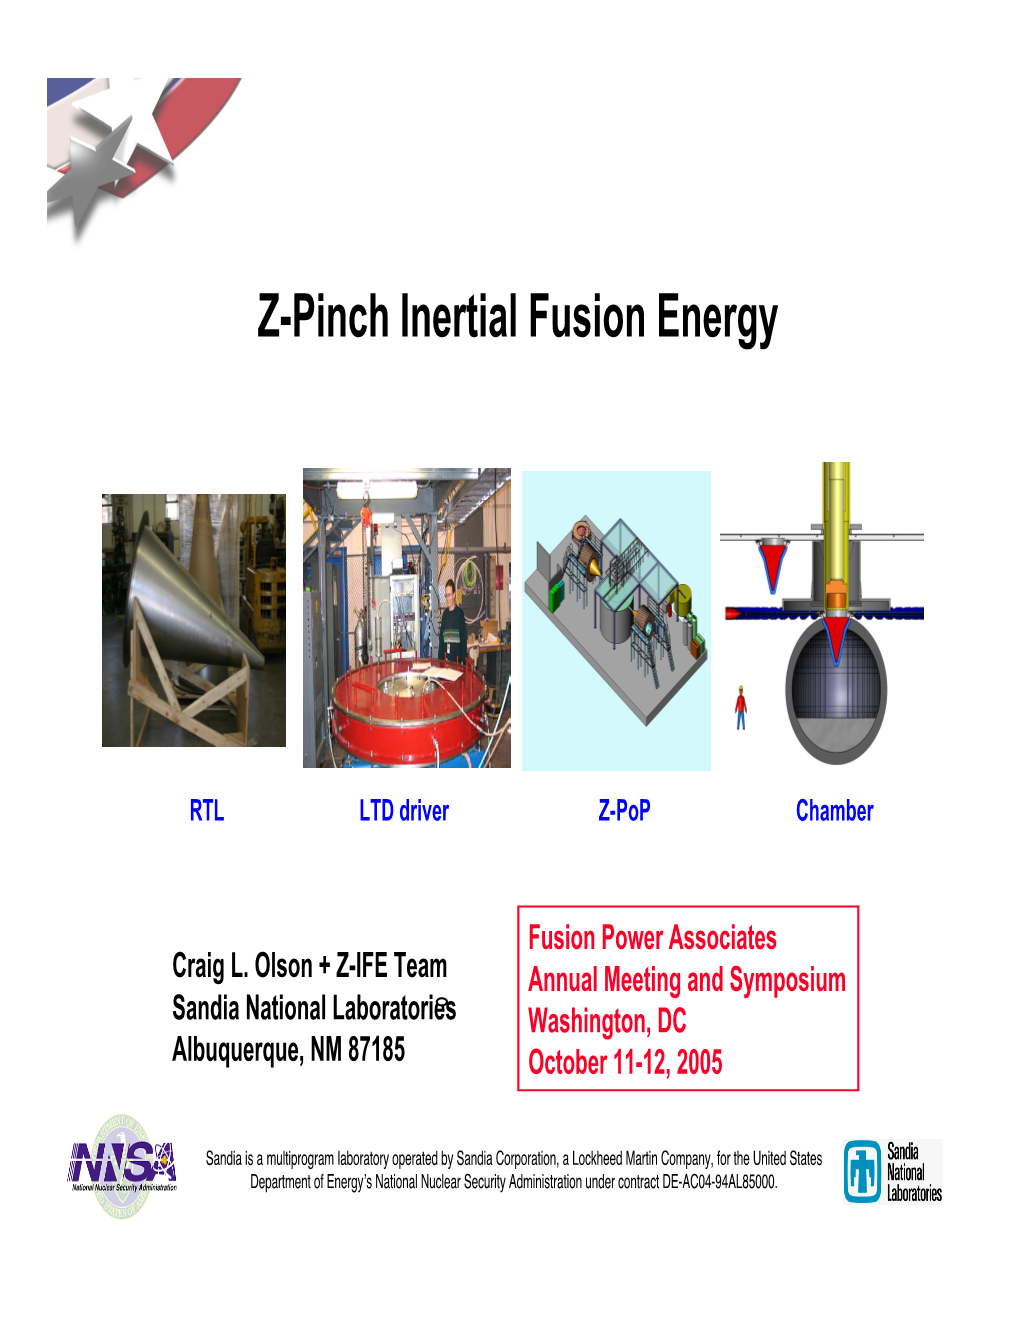 Z-Pinch Inertial Fusion Energy